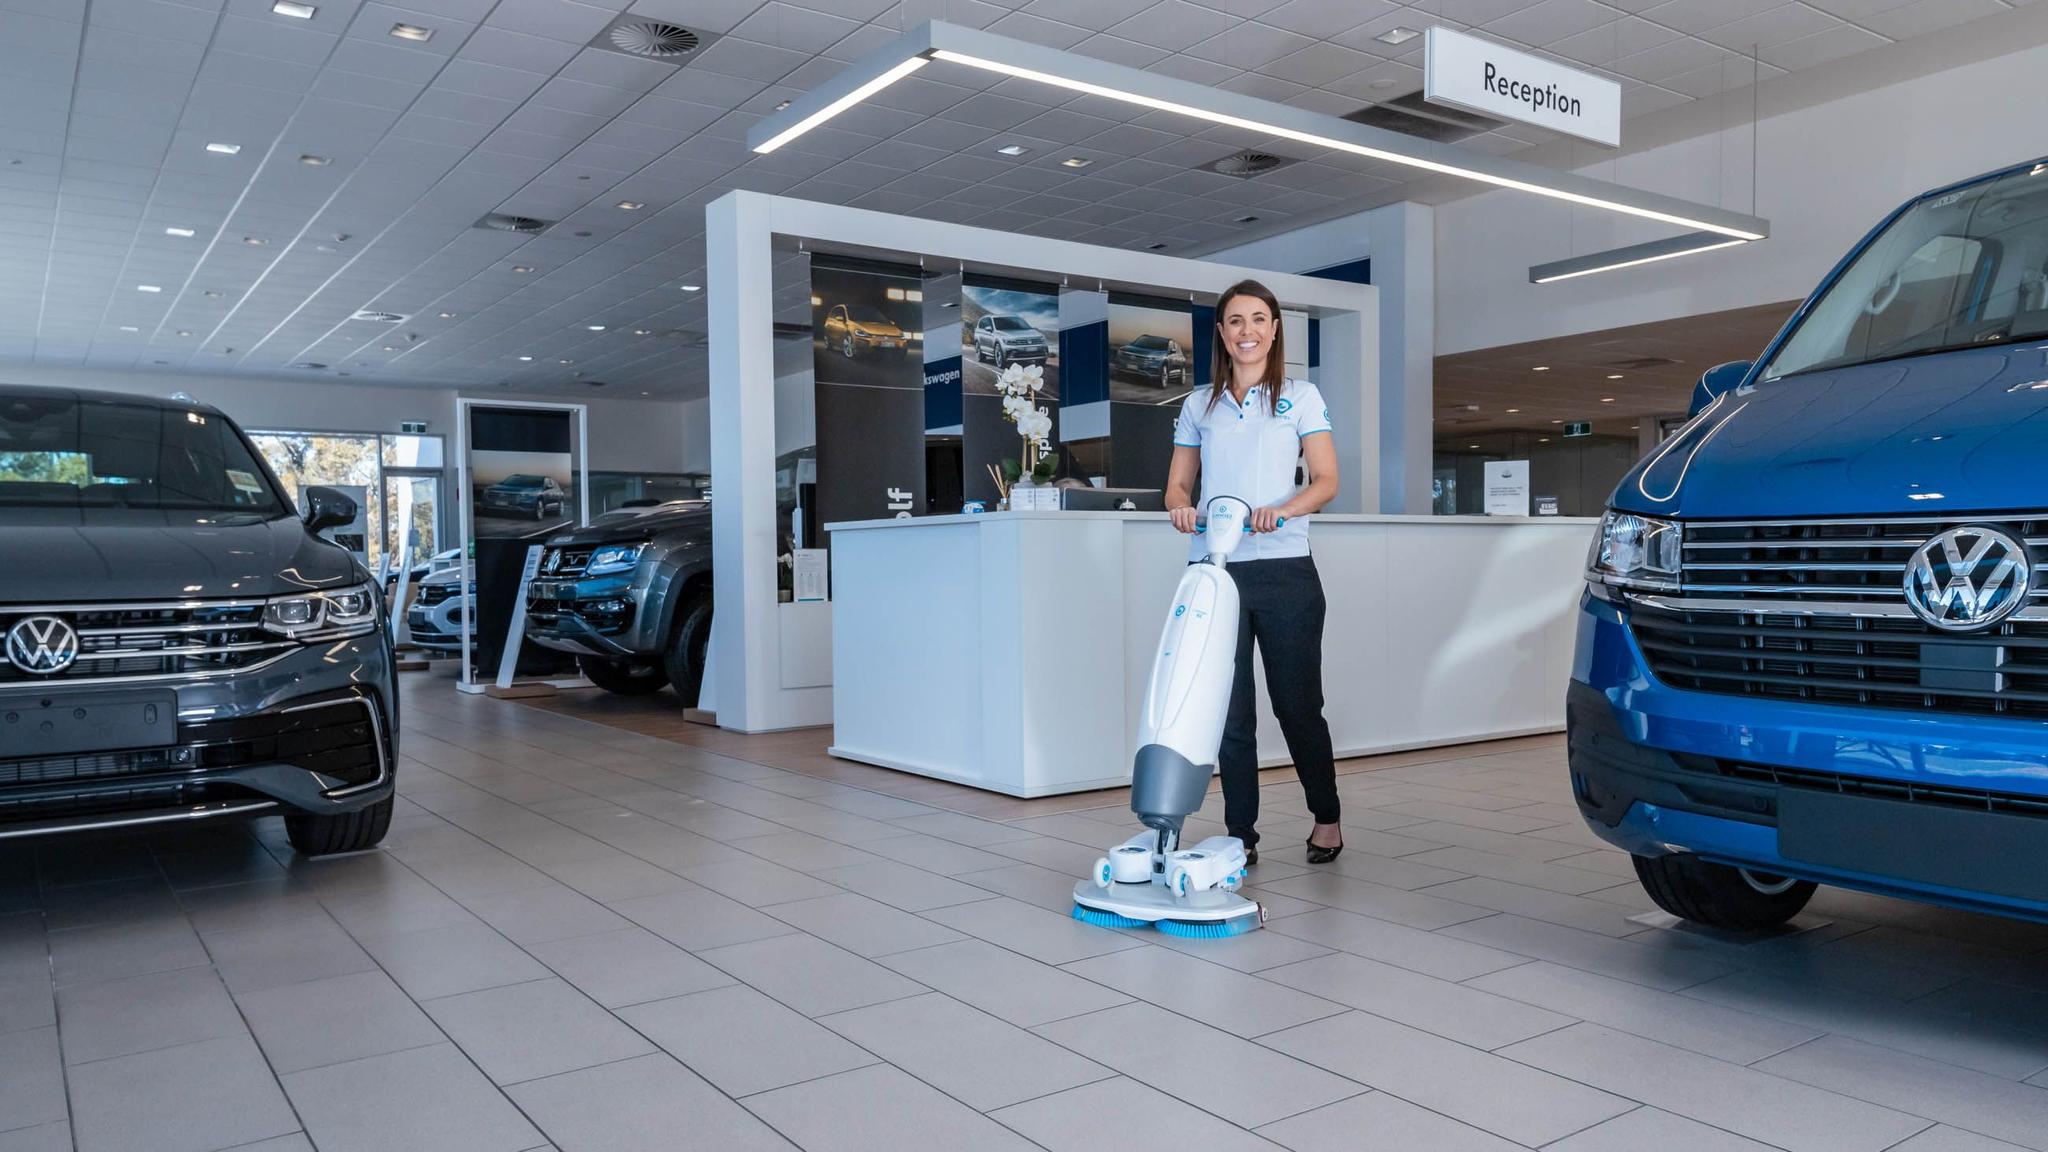 What You Should Look For In An Industrial Floor Mop?